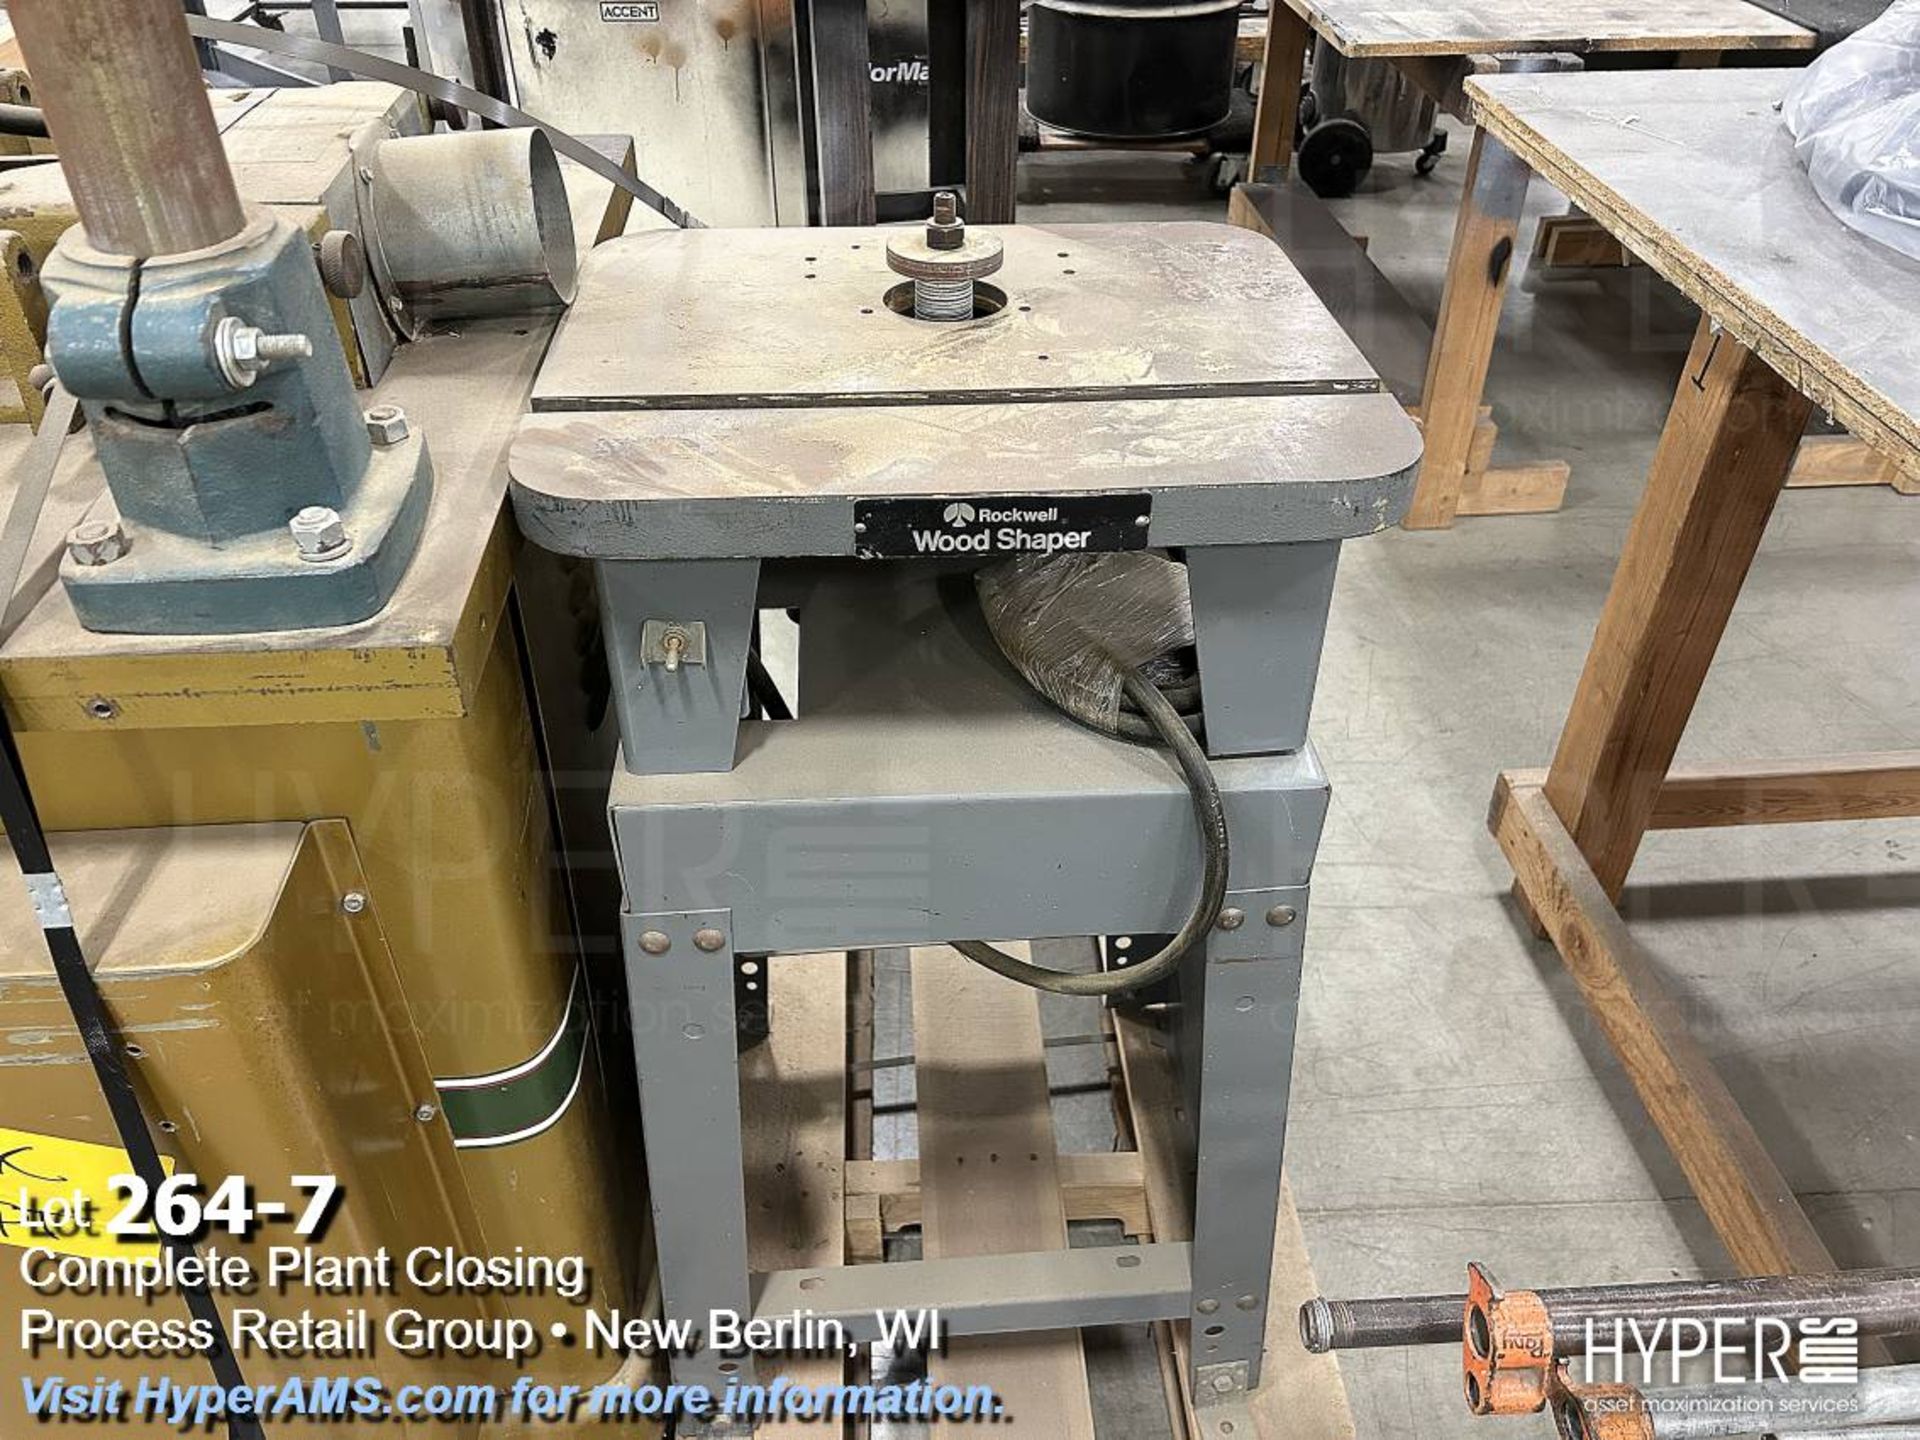 Powermatic 26 edger with 8 speed power feed and Rockwell wood shaper - Image 7 of 7